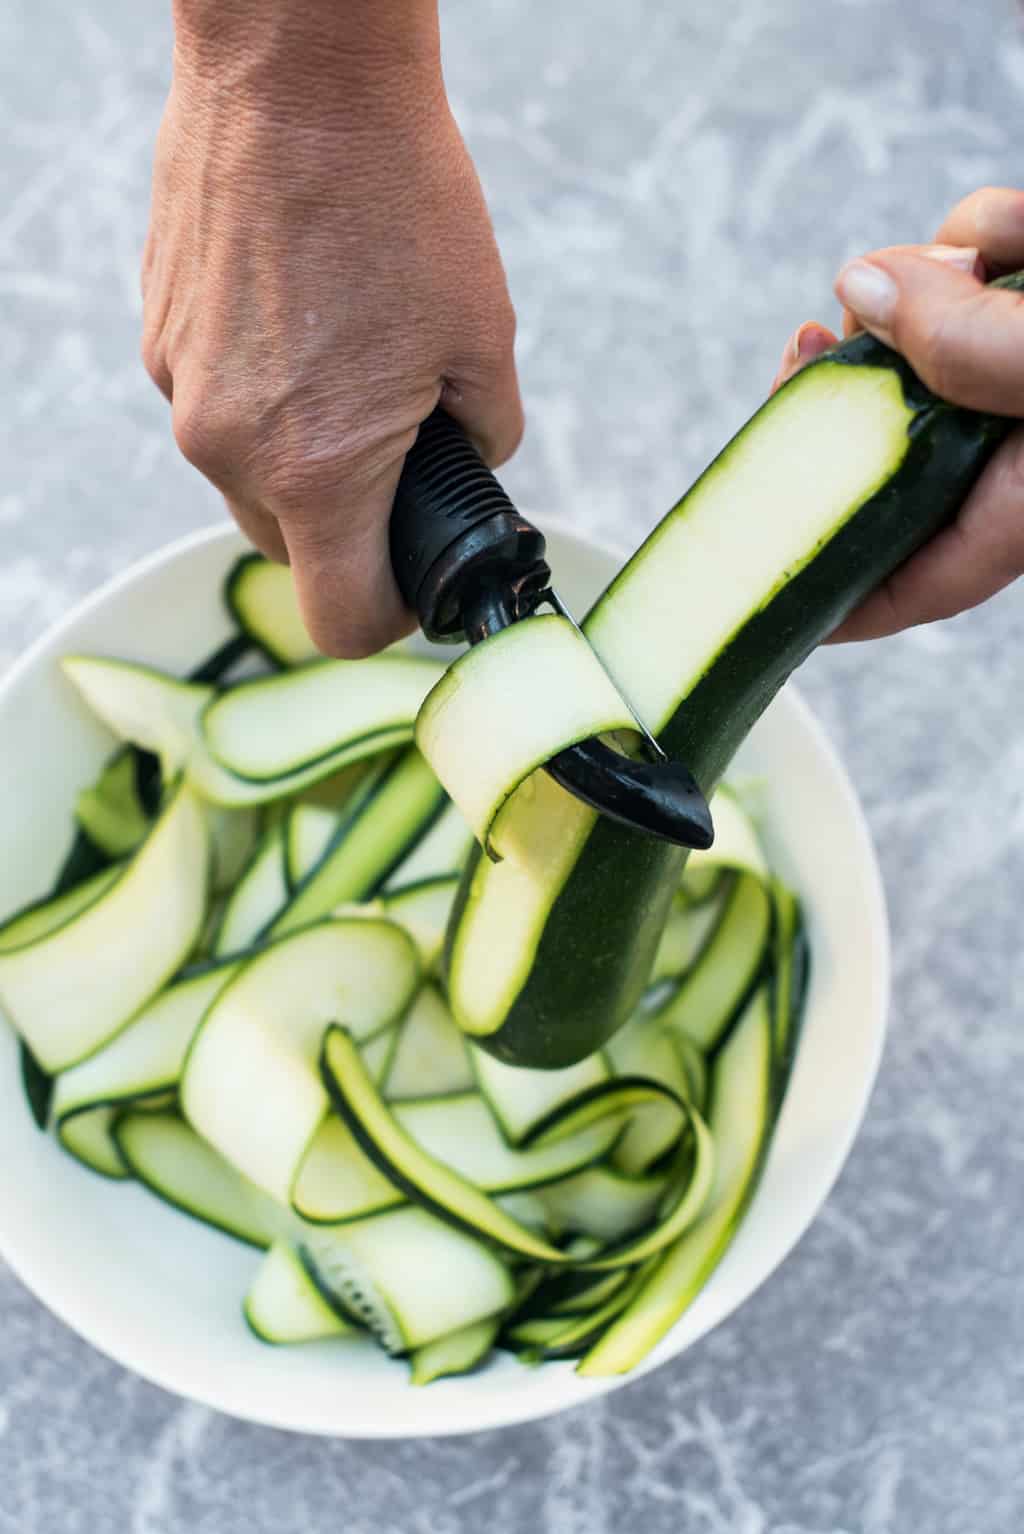 How to Make Zoodles or Zucchini Noodles with a Vegetable